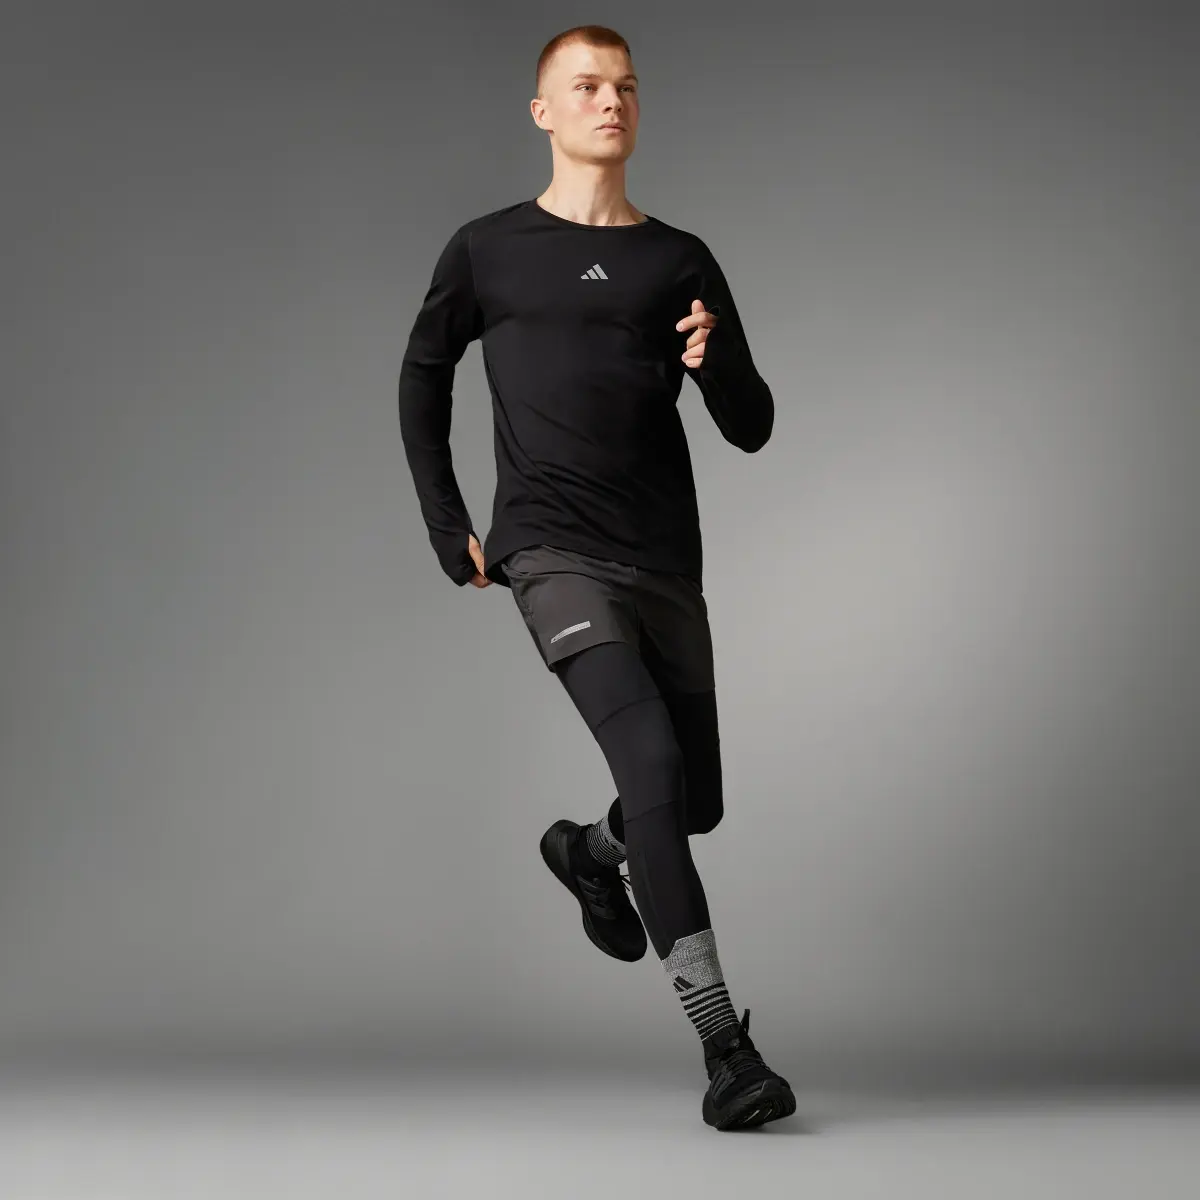 Adidas Ultimate Running Conquer the Elements Merino Long Sleeve Shirt. 3